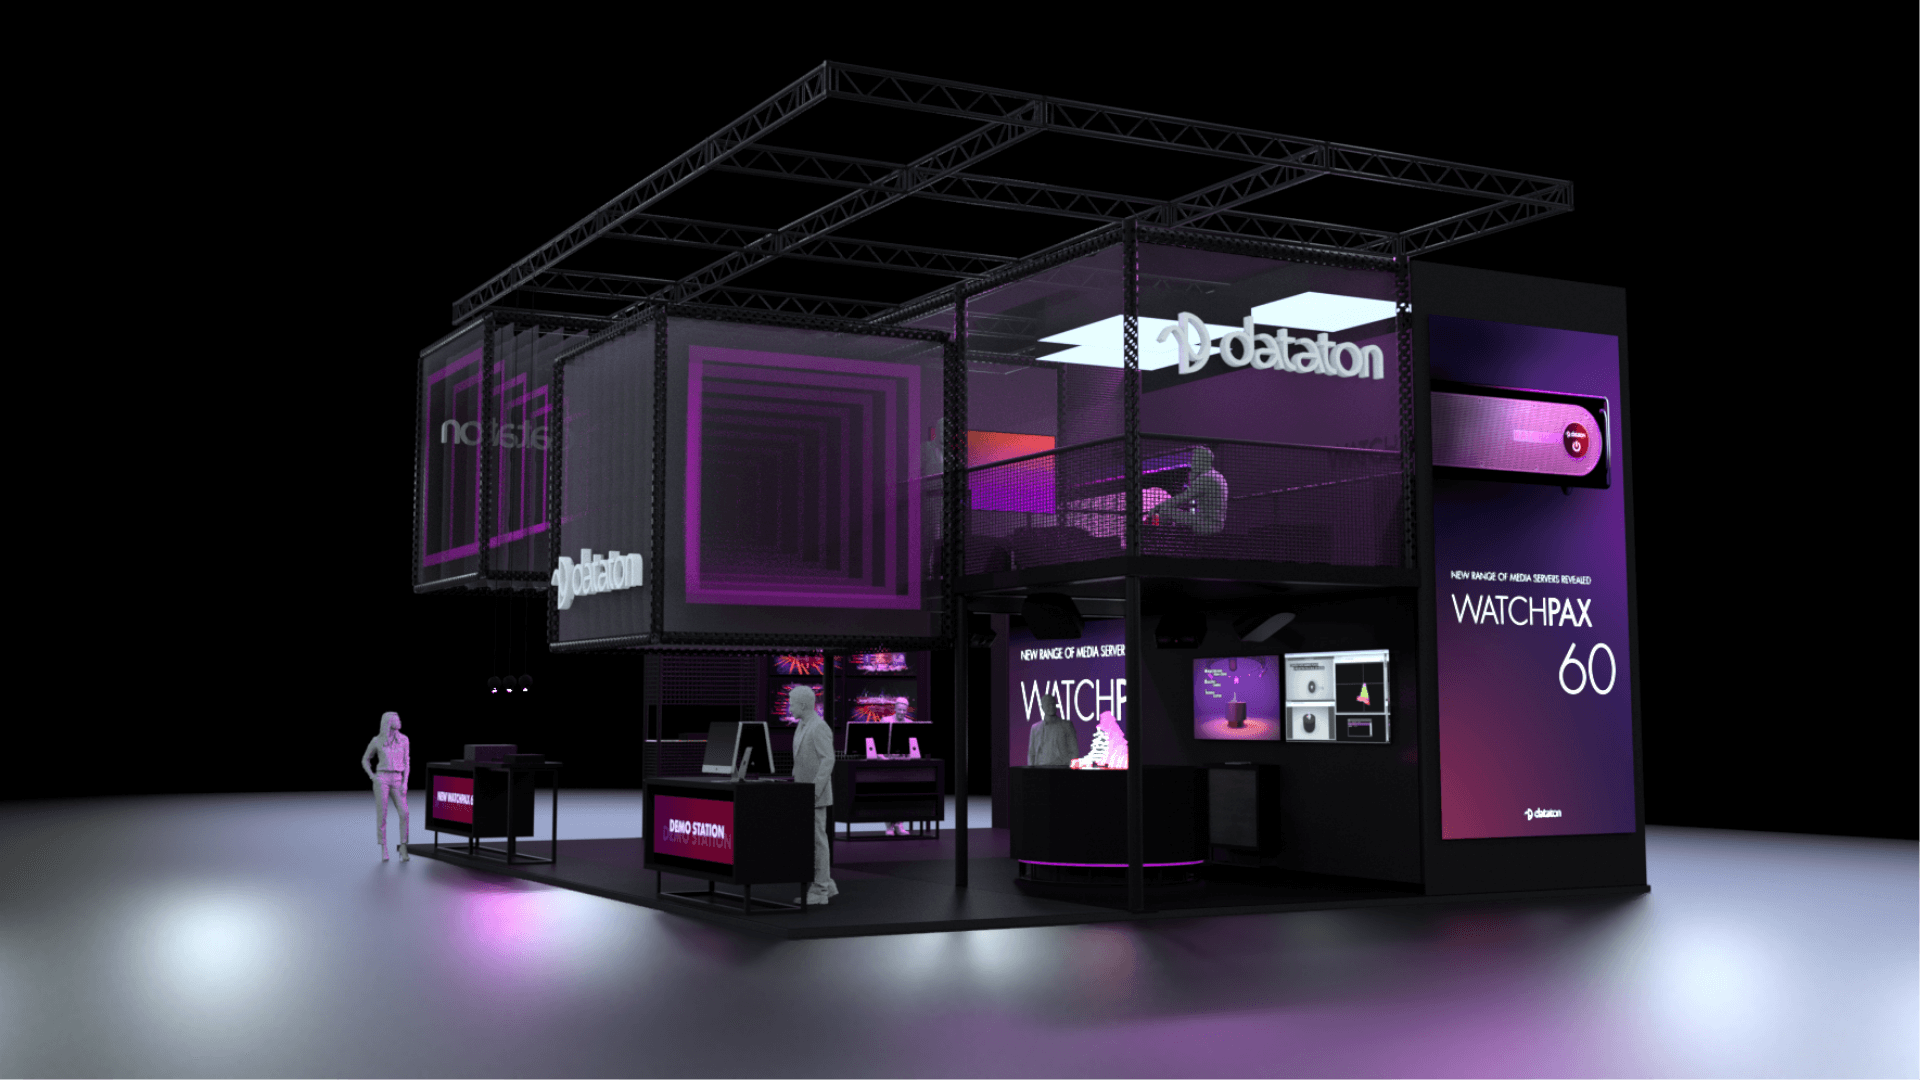 exhibition and fairs dataton booth design on ise